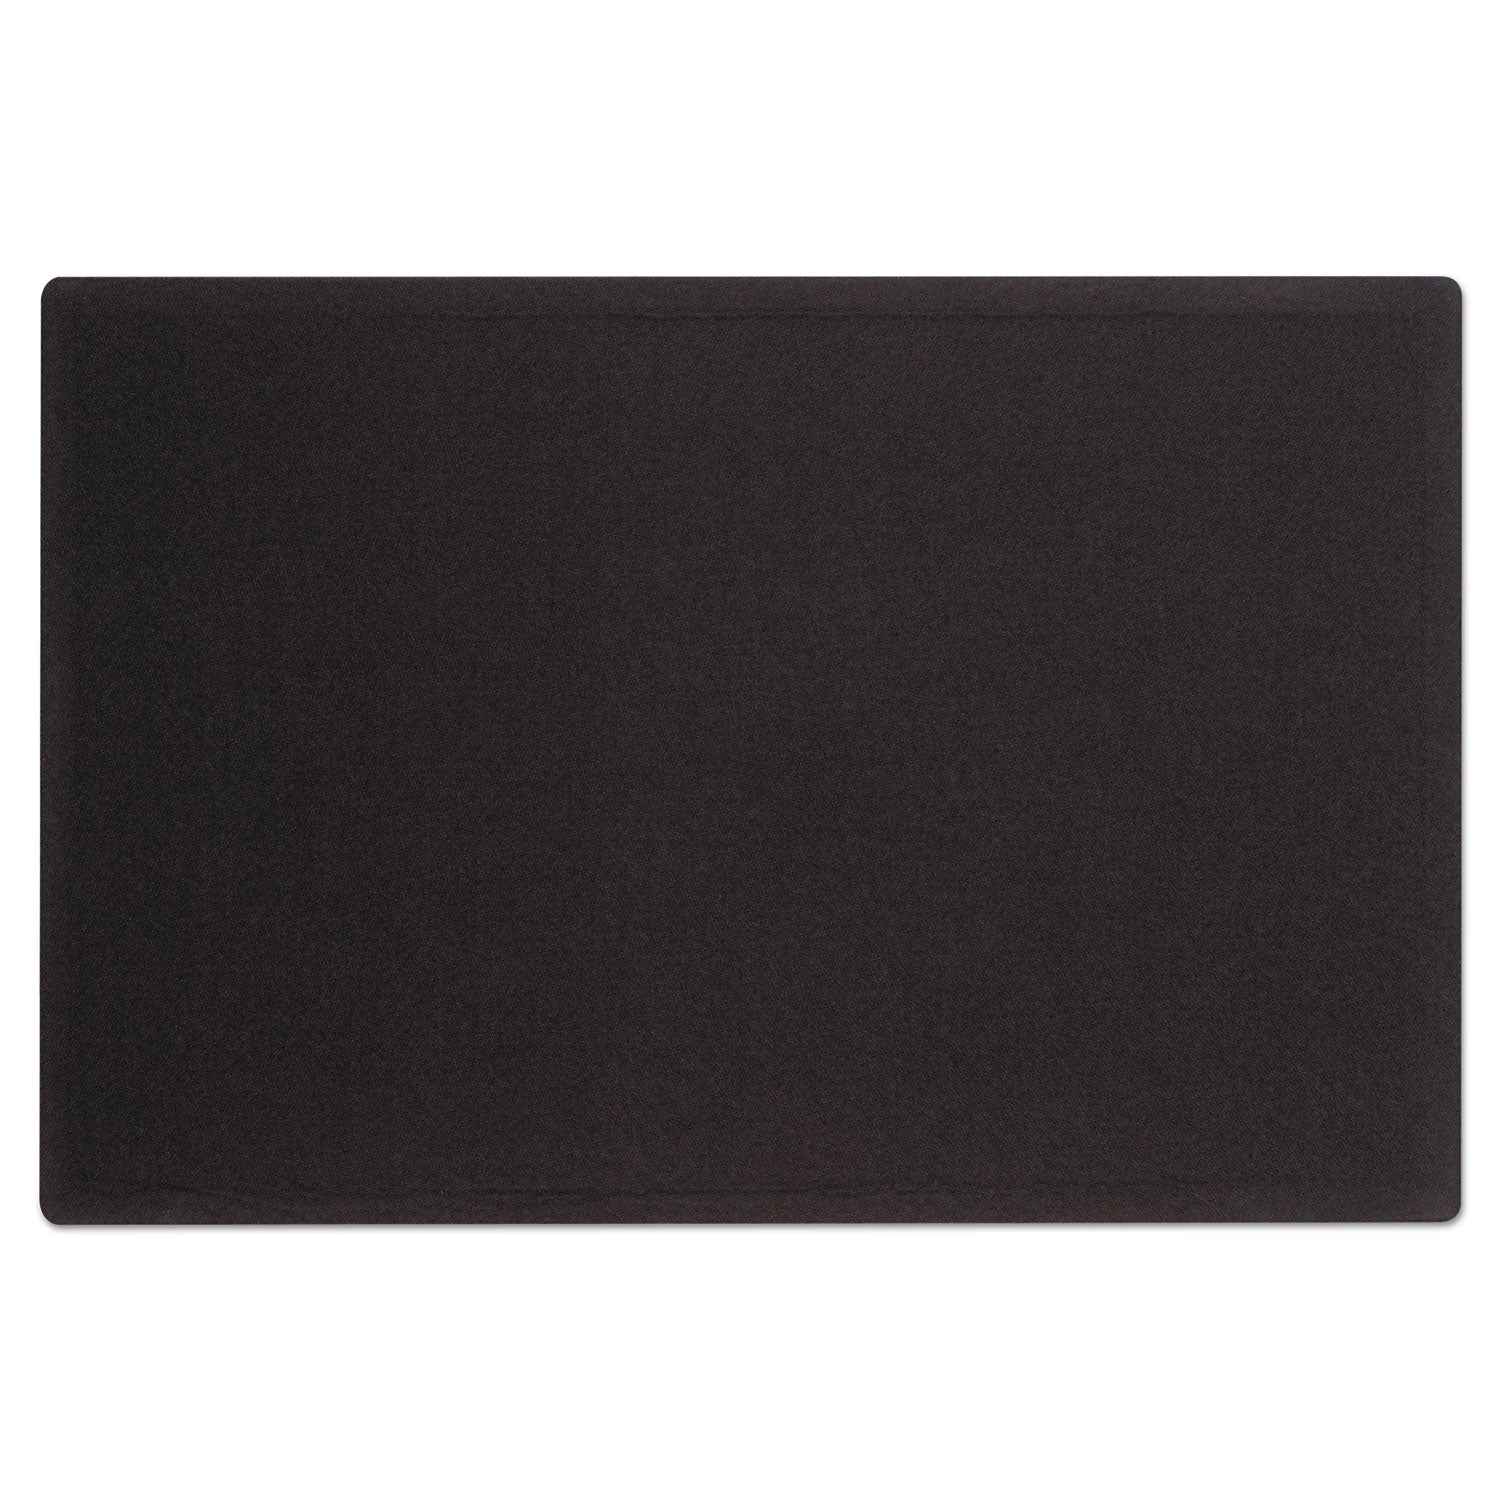 Oval Office Fabric Board, 48 x 36, Black Surface - 